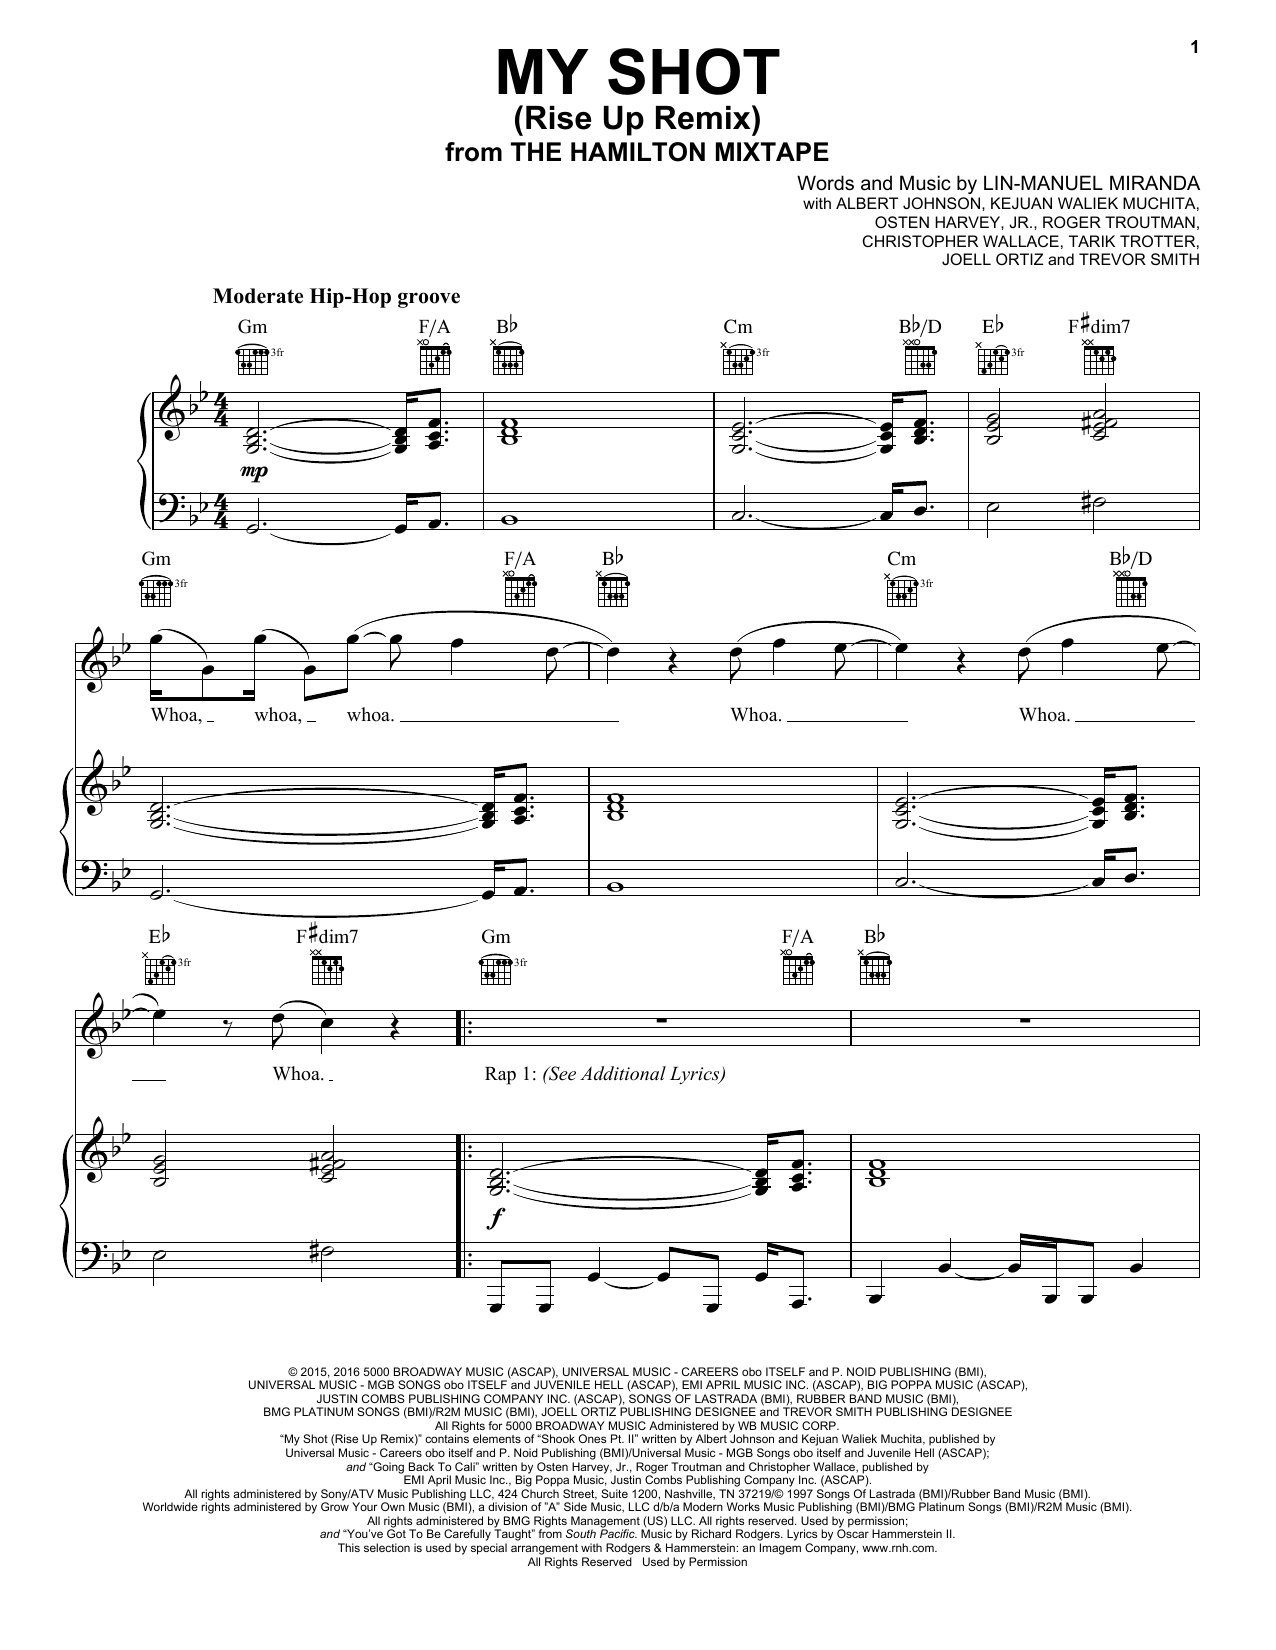 Download The Roots, Busta Rhymes, Joell Ortiz My Shot (Rise Up Remix) Sheet Music